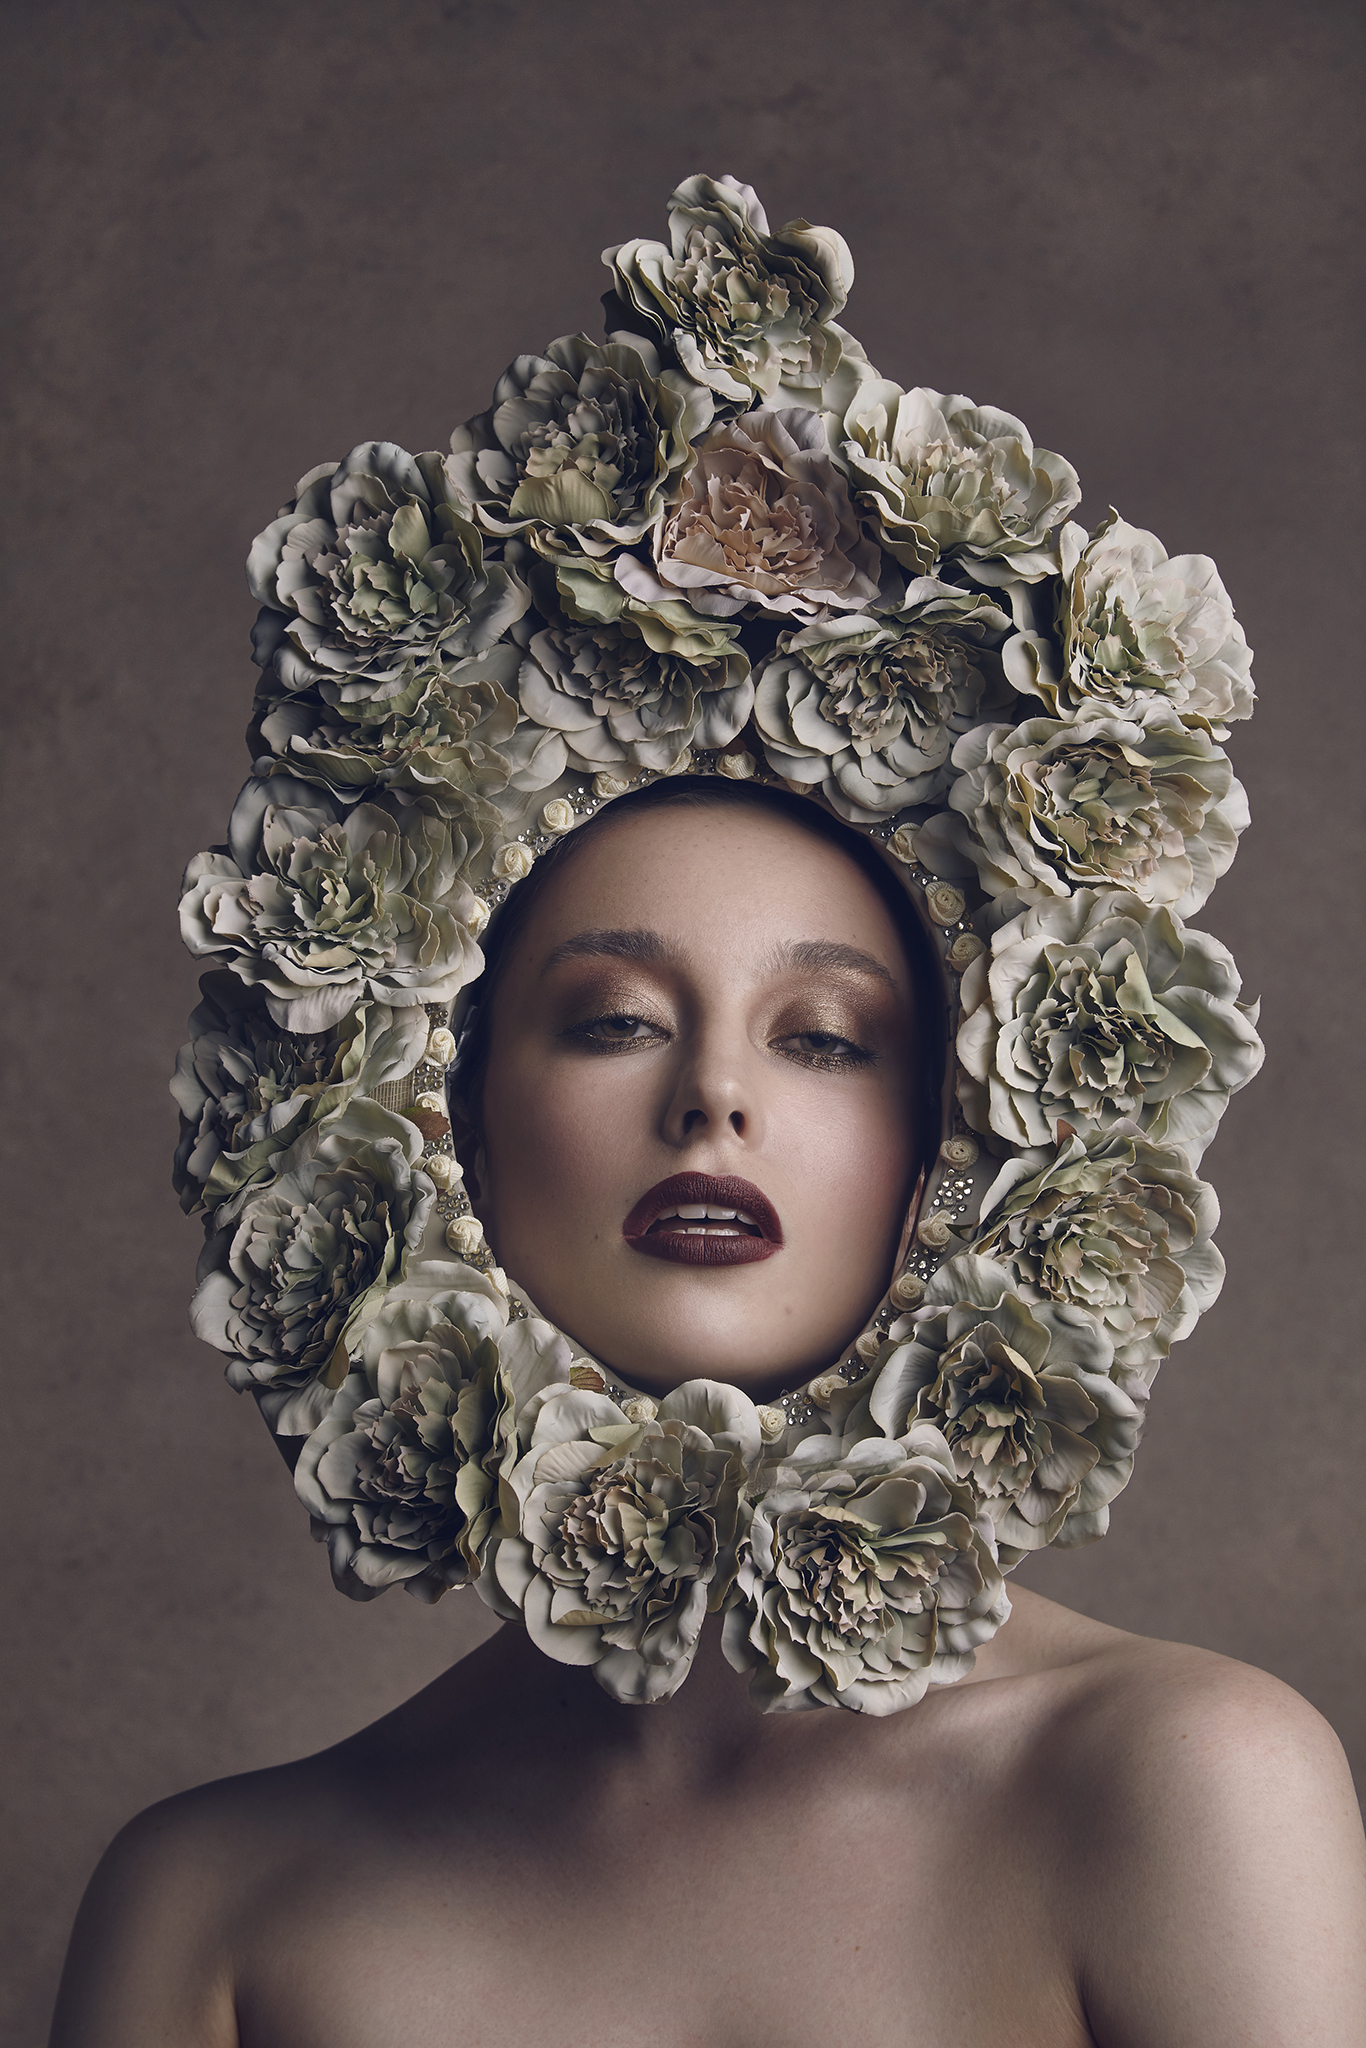 The-Flower-Book-by-Dana-Cole-floral-headpiece-model-fashion-photography-fine-art-photography-beauty-photo-floral-shoot-3.jpg